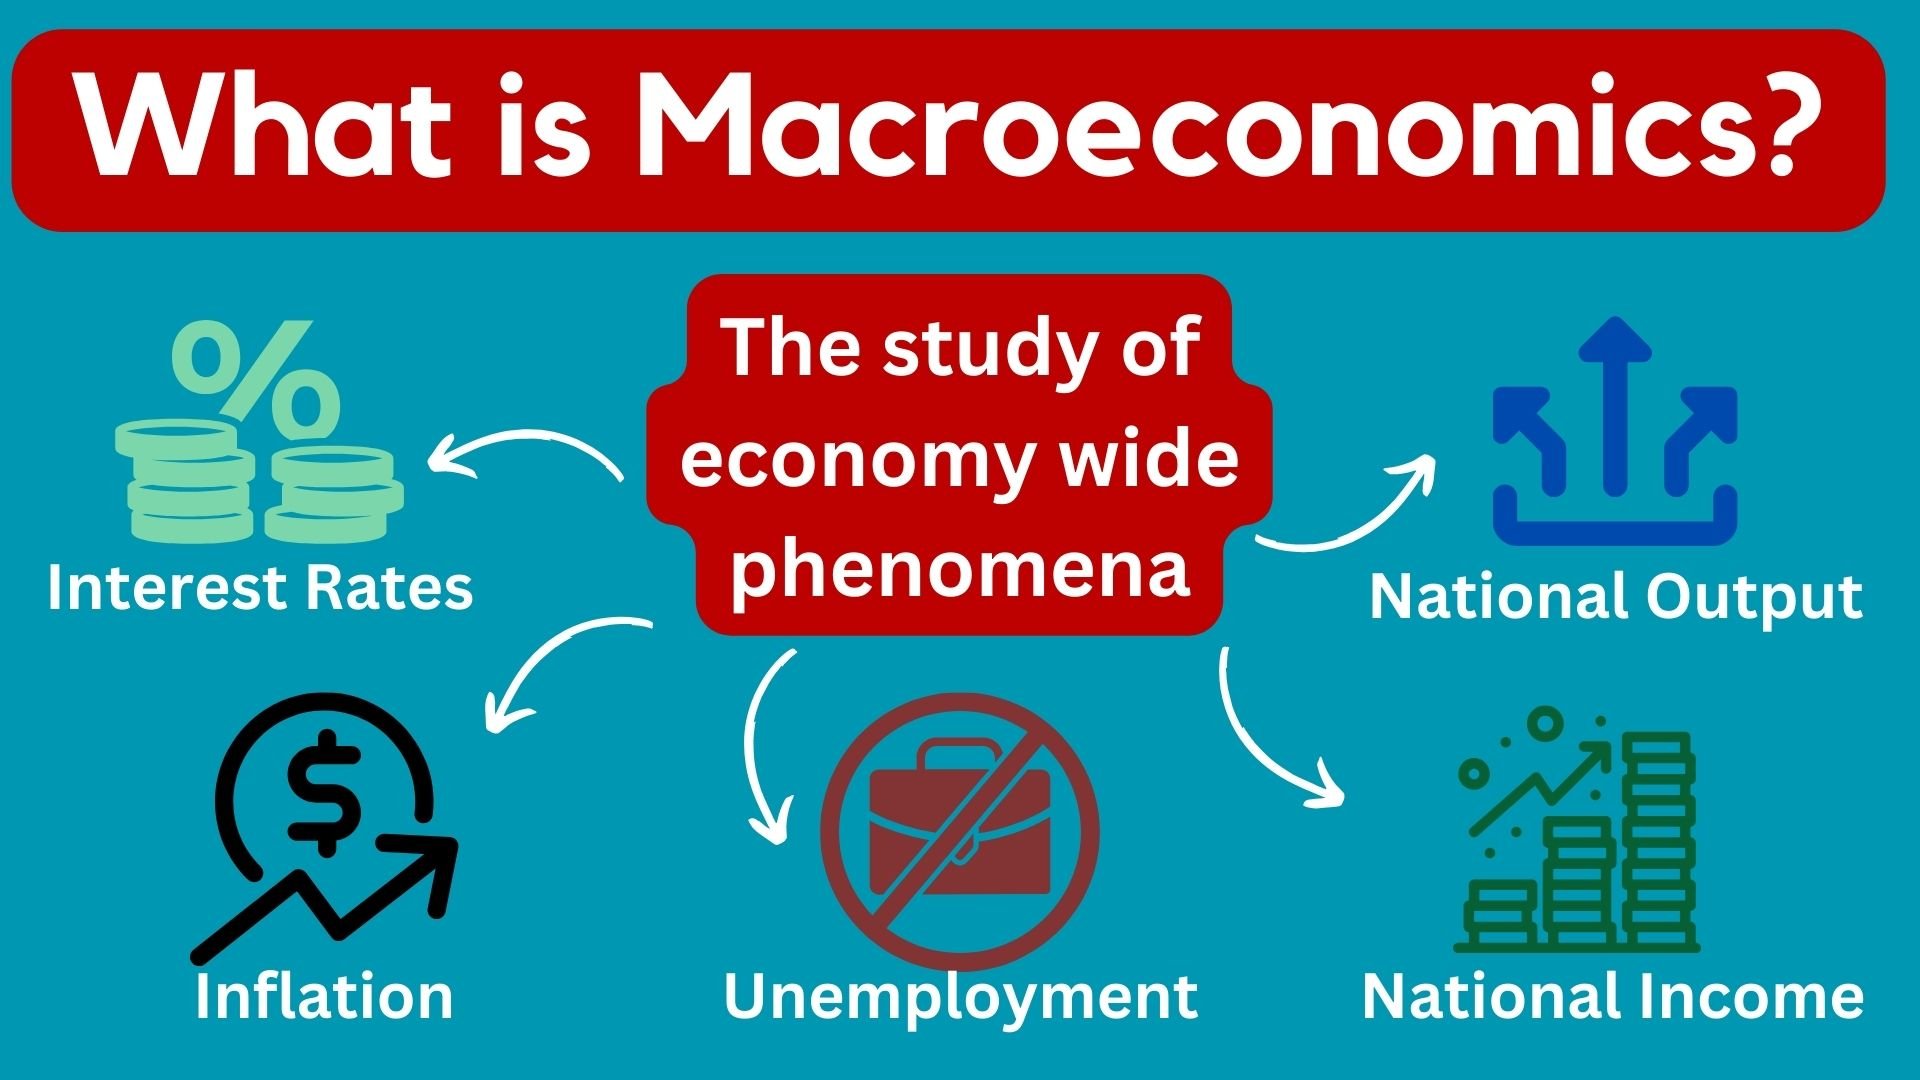 Image explaning the core concepts covered by macroeconomics